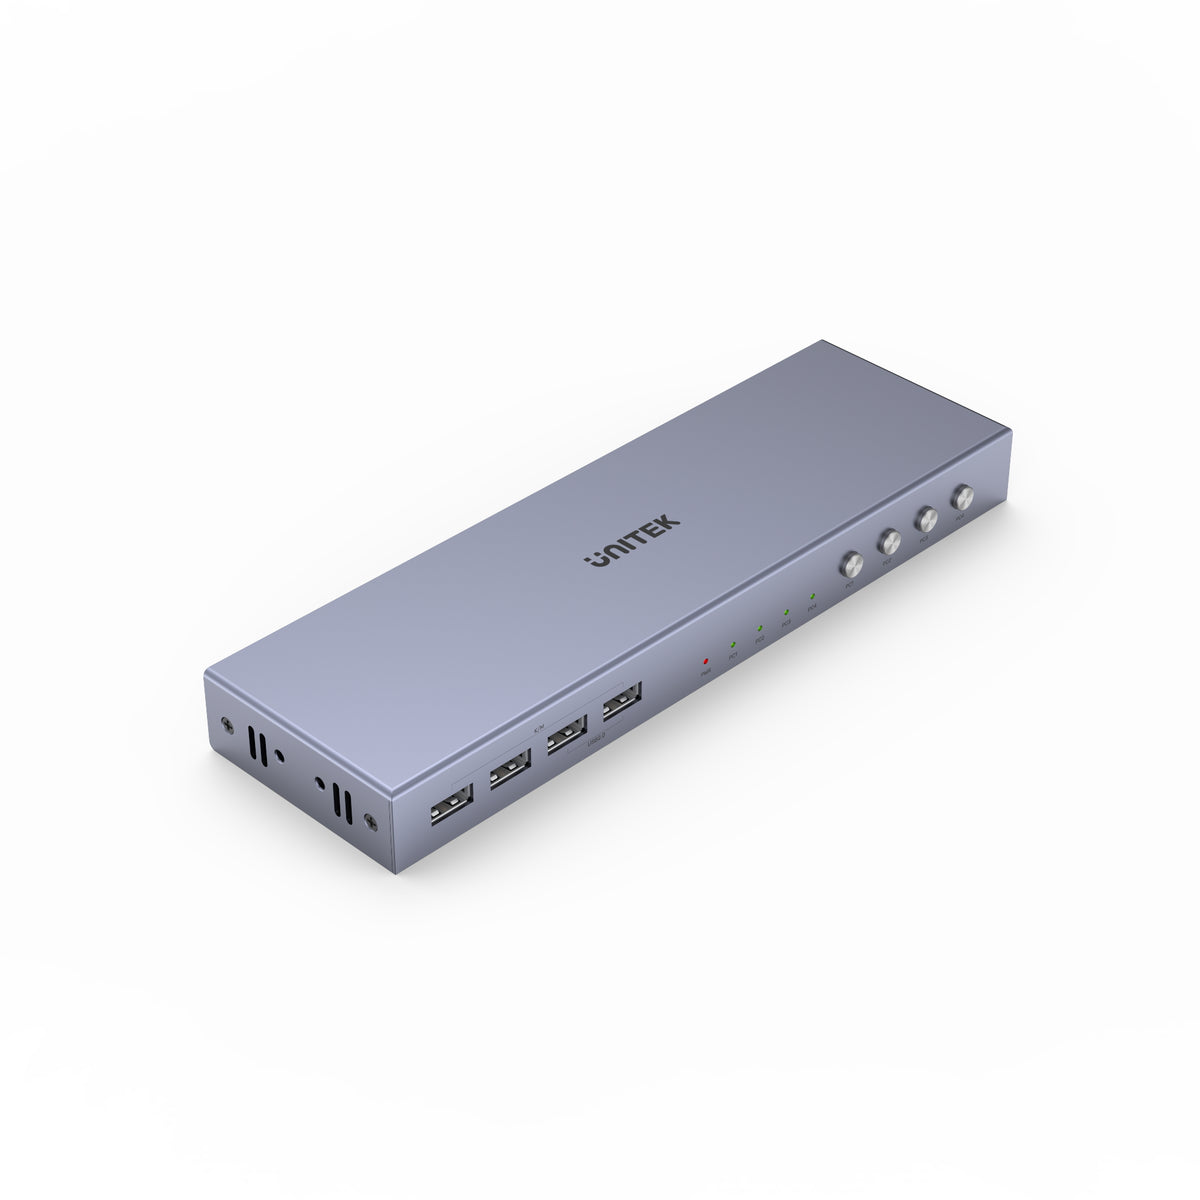 USB C KVM Switch 2 Port 4K@60Hz - with 3 USB 2.0 Ports & 100W Power  Delivery, Type C KVM Switch for 2 Computers Share 1 Monitor Keyboard &  Mouse